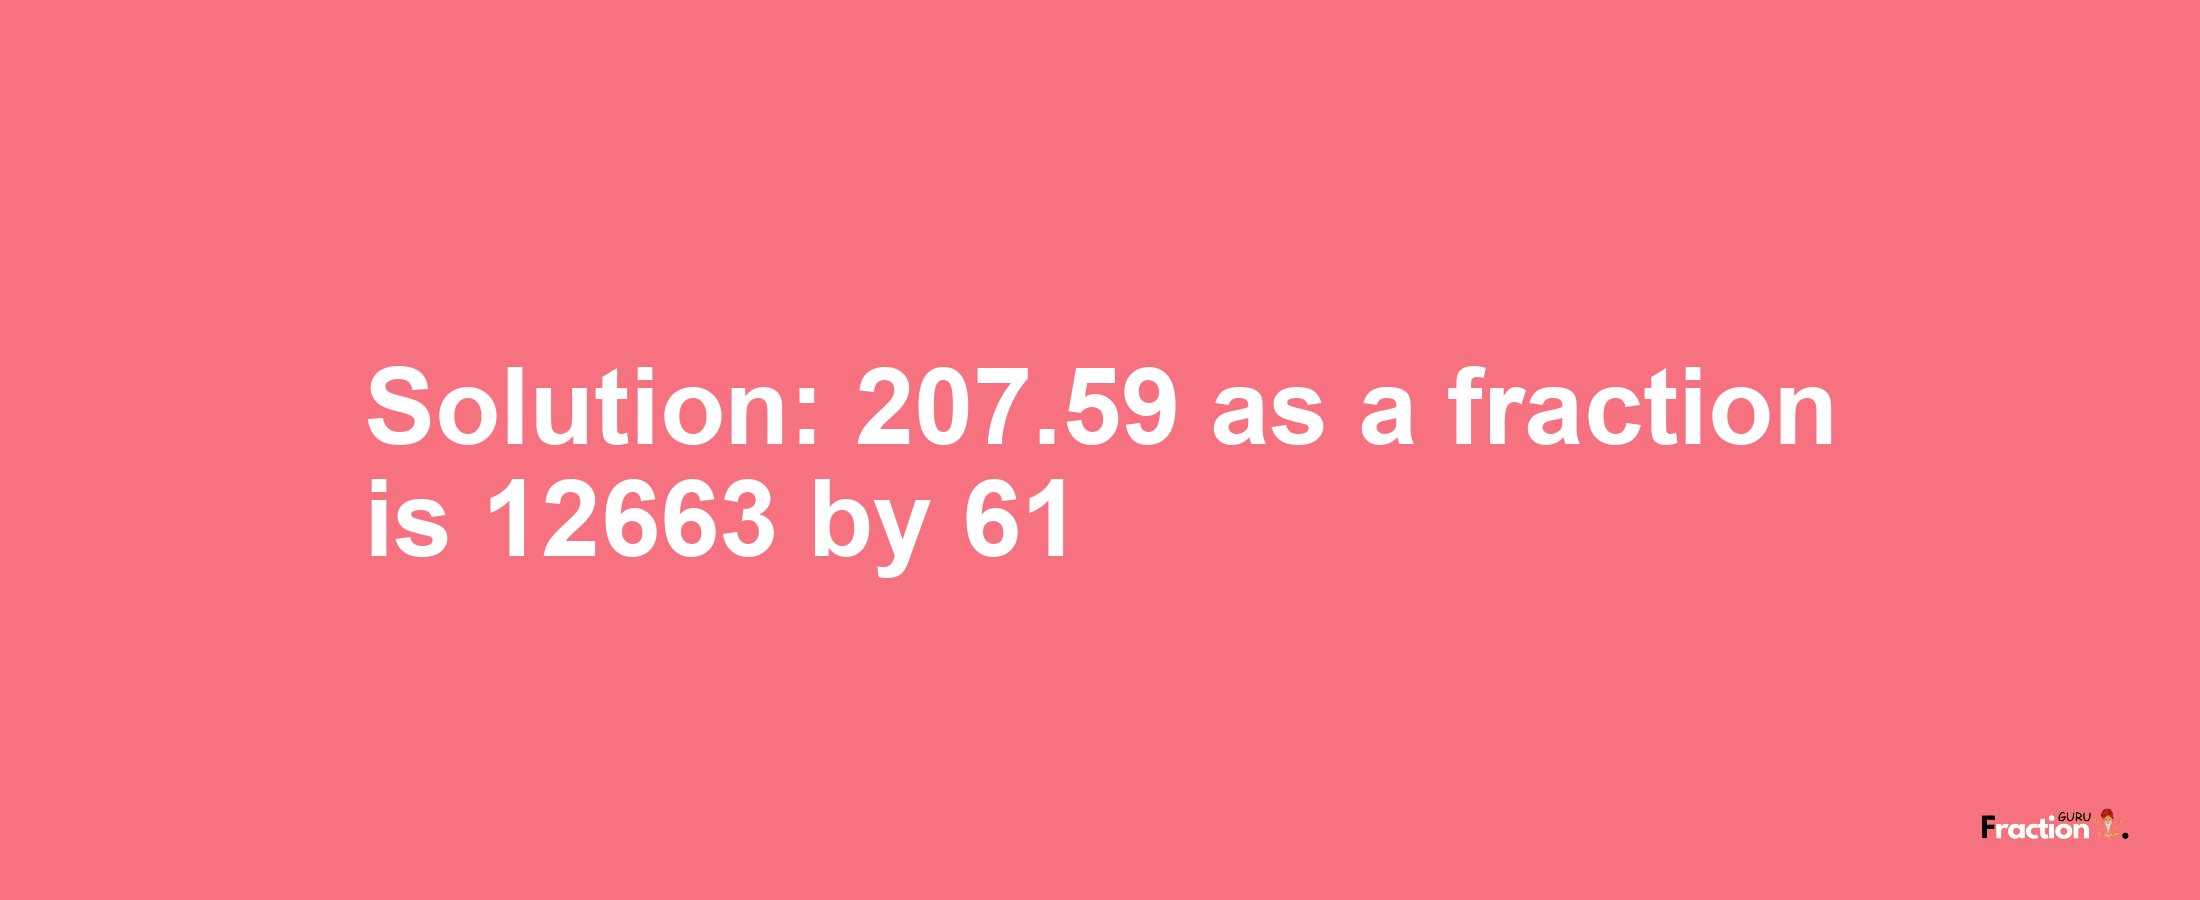 Solution:207.59 as a fraction is 12663/61